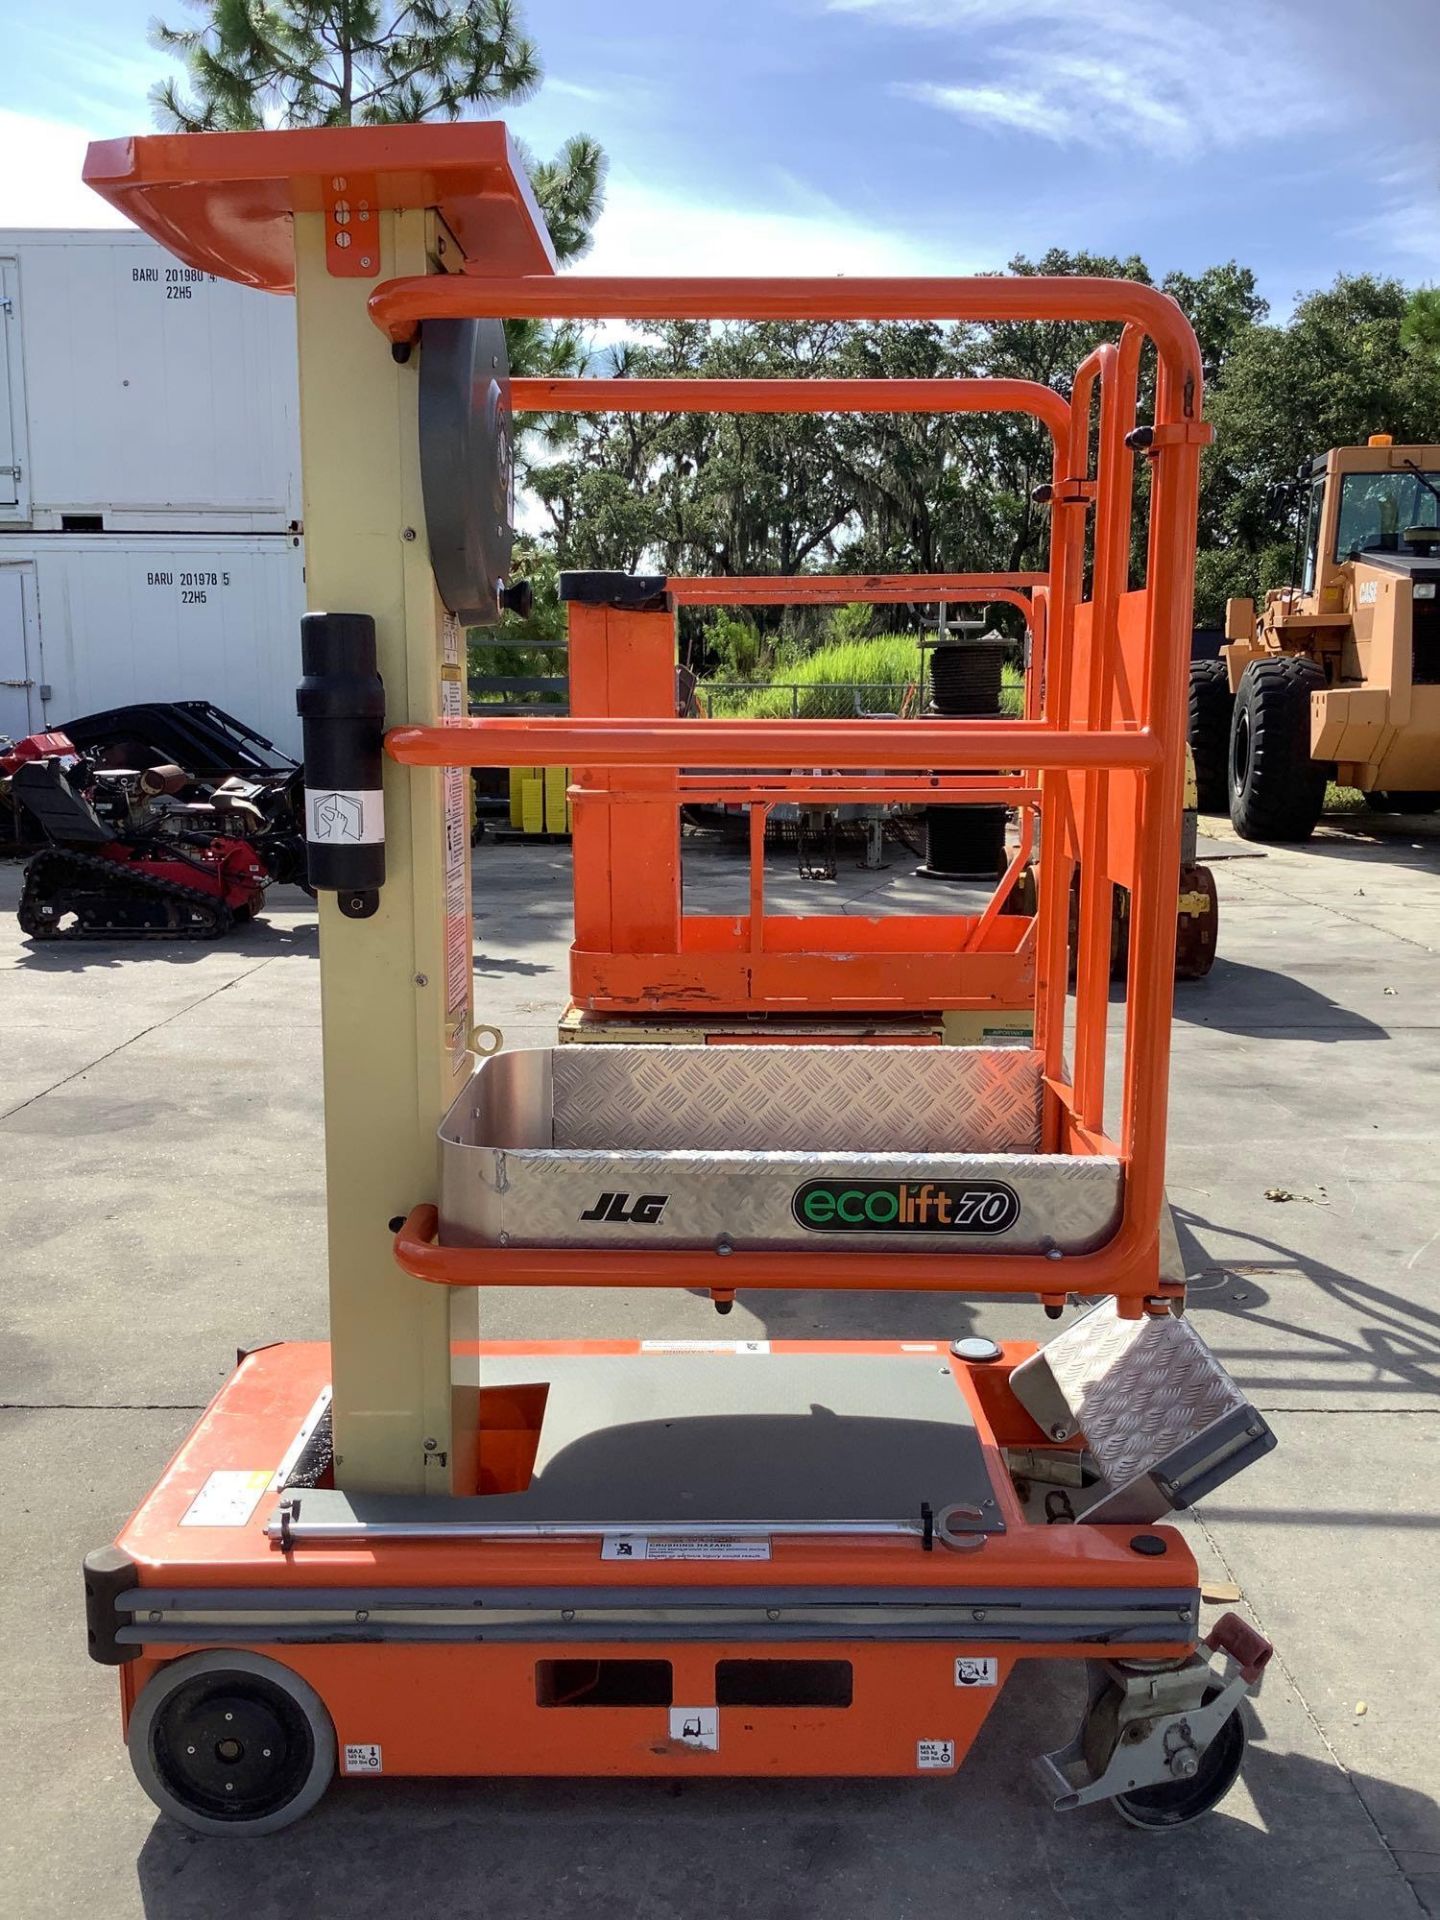 2018 JLG ECOLIFT 70,MANUAL, APPROX MAX PLATFORM HEIGHT 7FT, NON MARKING TIRES - Image 7 of 10